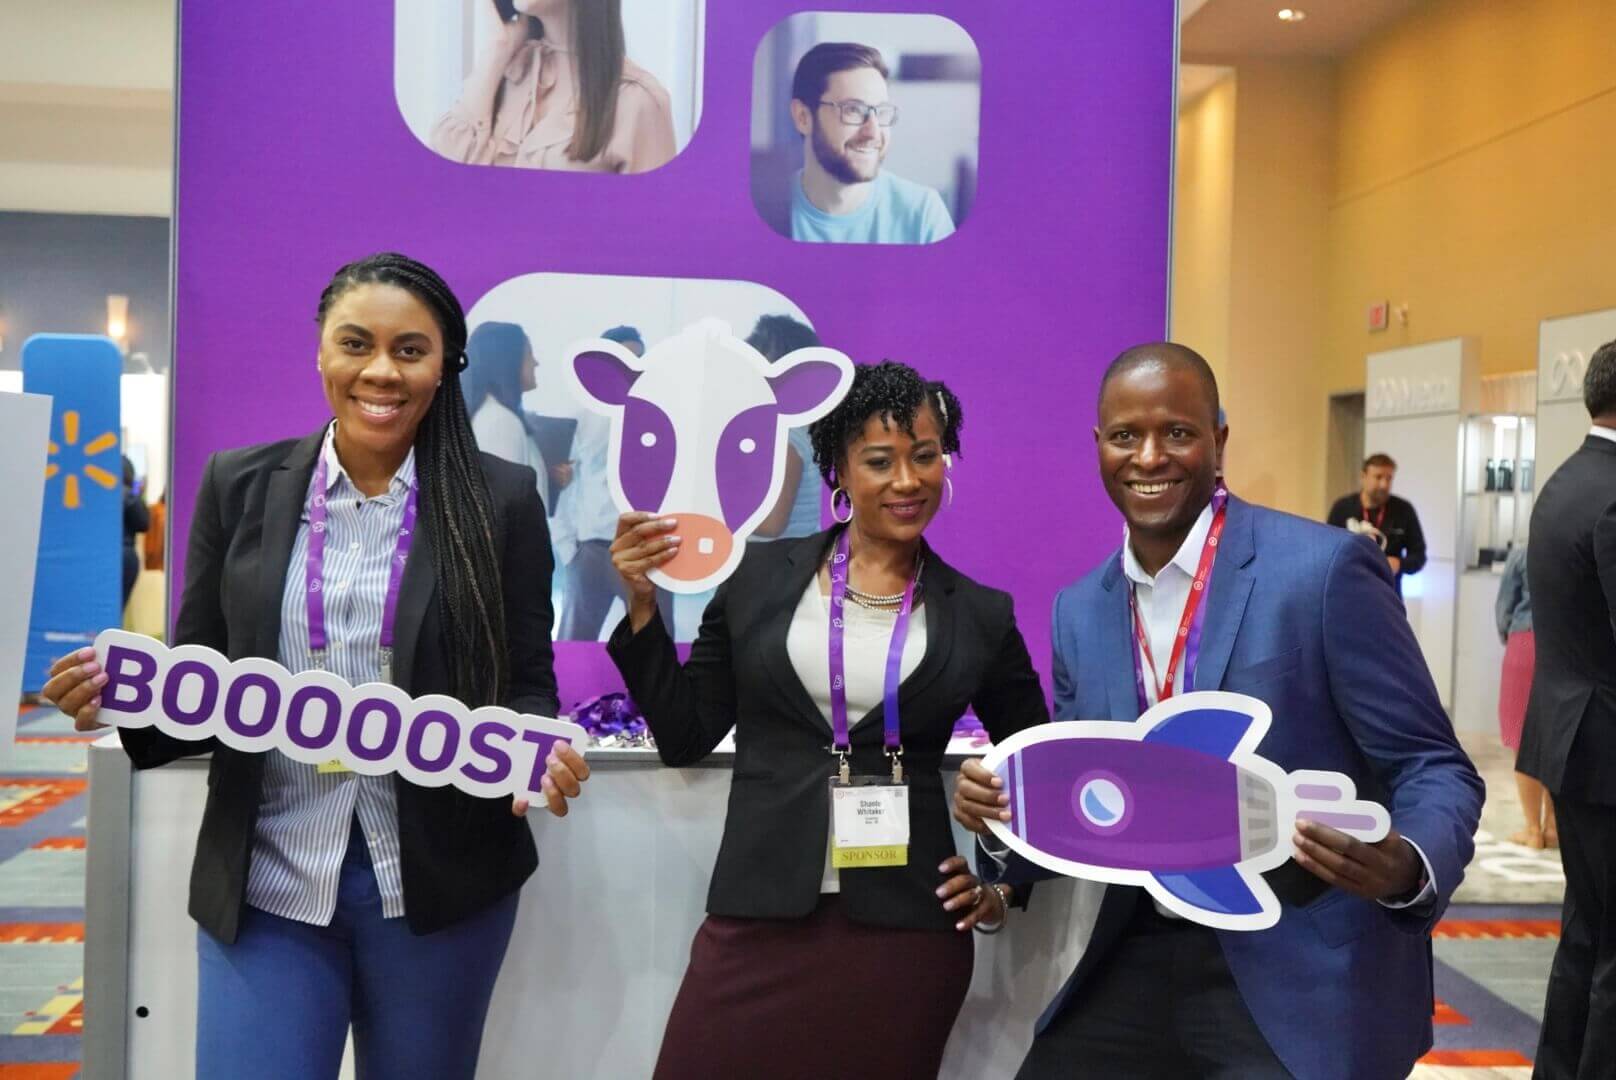 Three people holding up Experian Boost cutouts at a conference booth